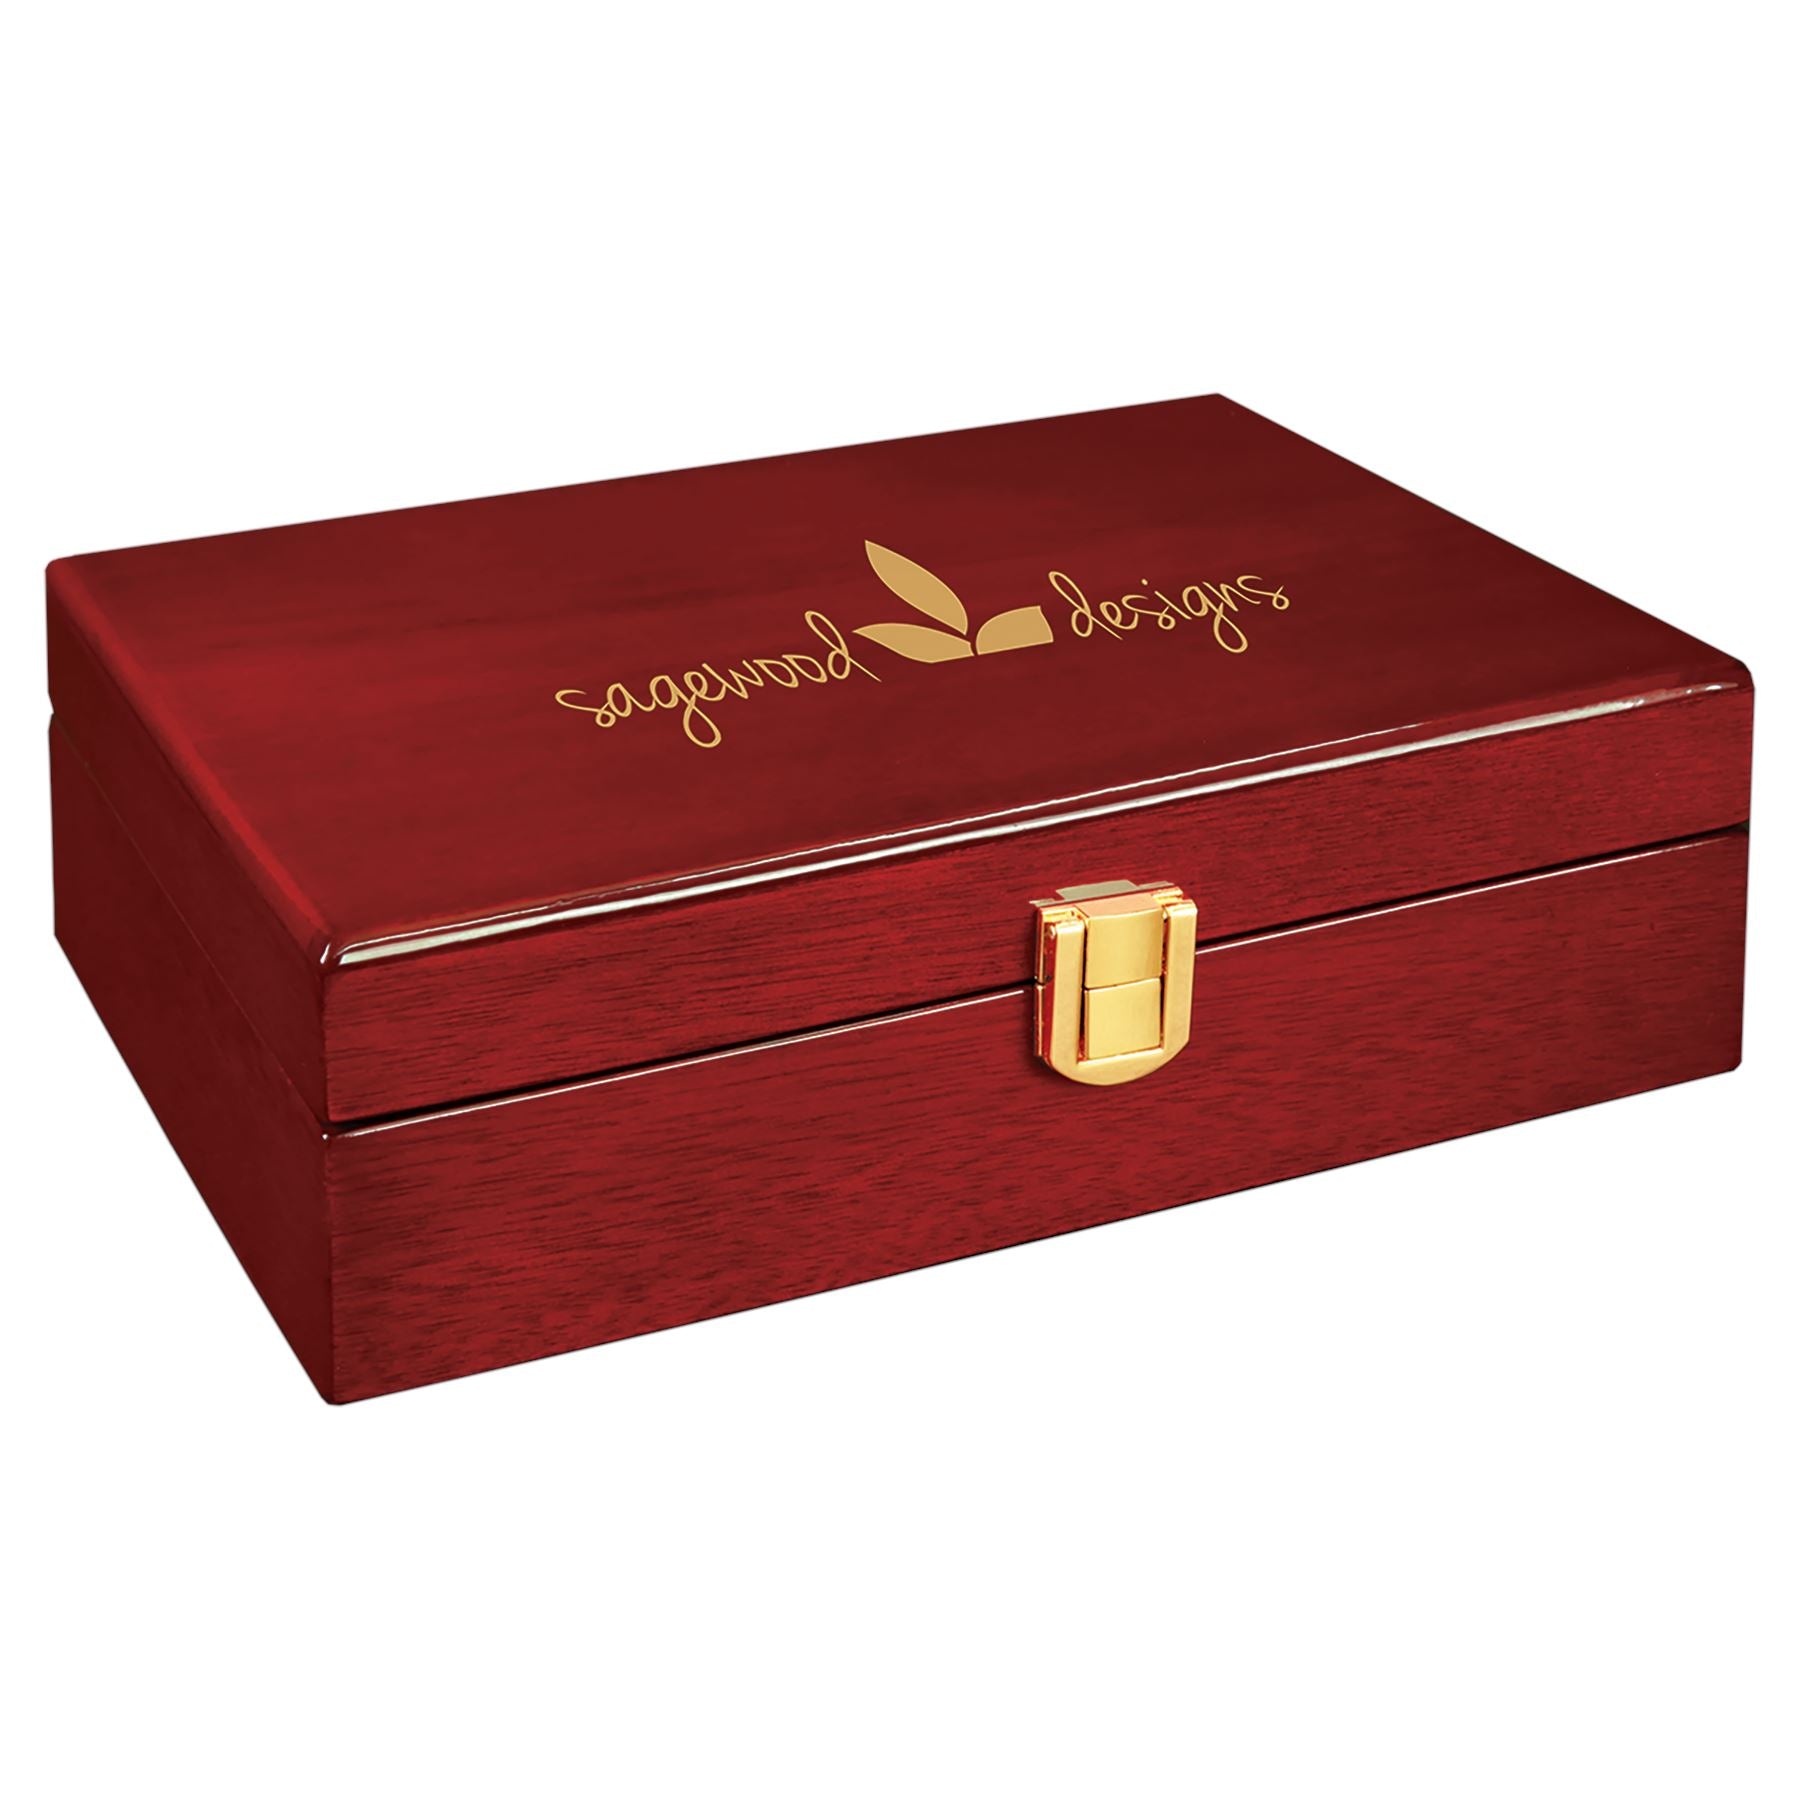 Rosewood Piano Finish Gift Box, 12 1/4" x 8 1/4" x 3, Laser Engraved Gift Box Craftworks NW 